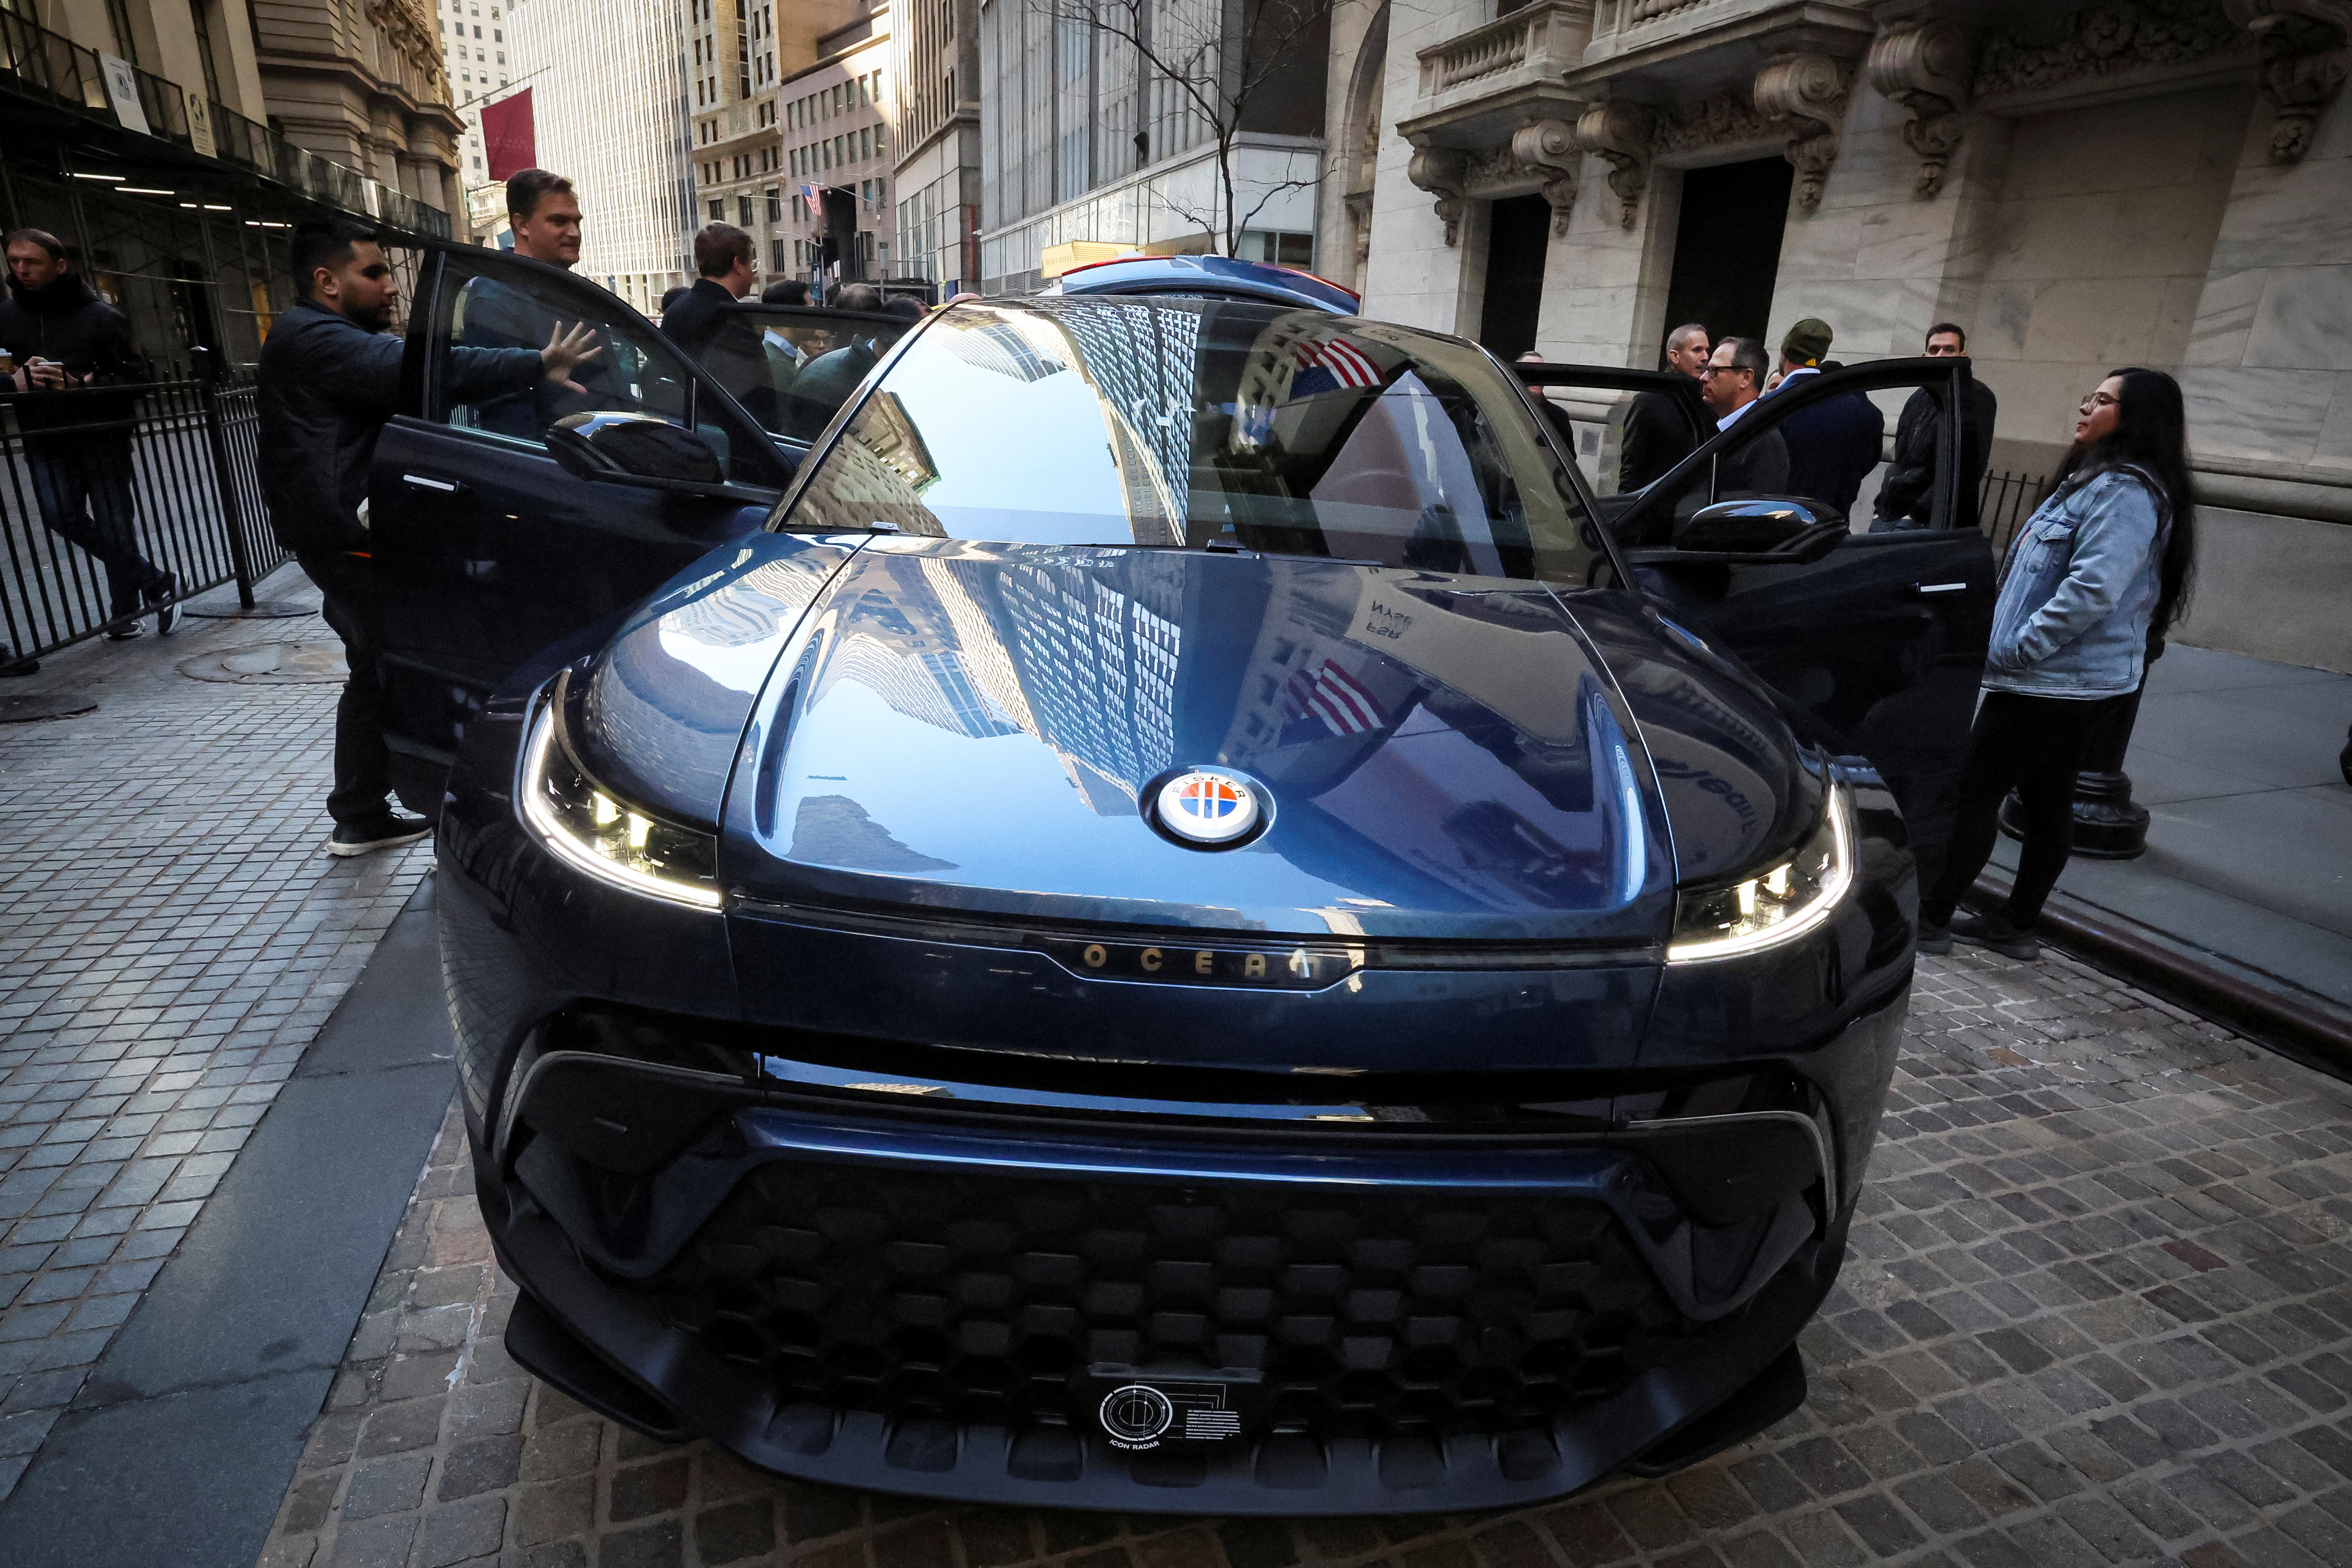 A Fisker Ocean is displayed during an event outside the NYSE in New York